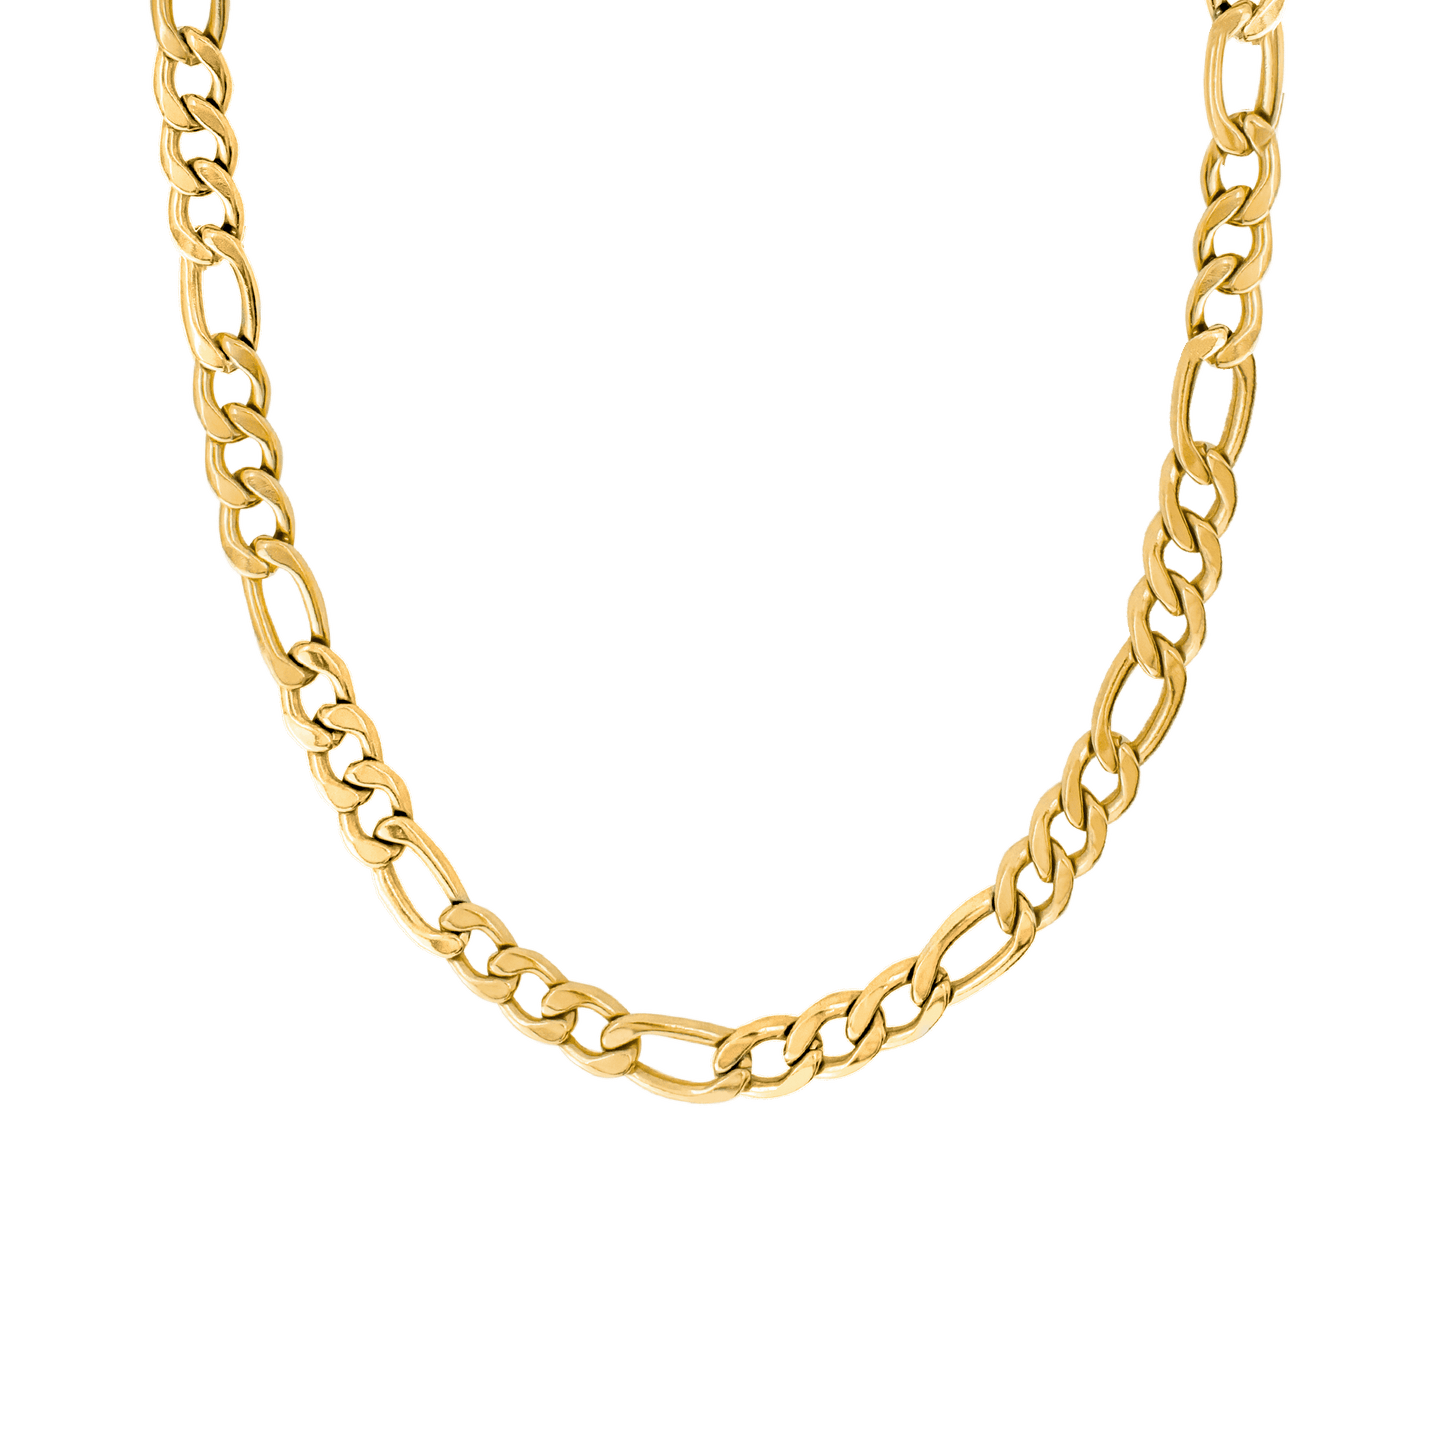 One in a Million Necklace Gold